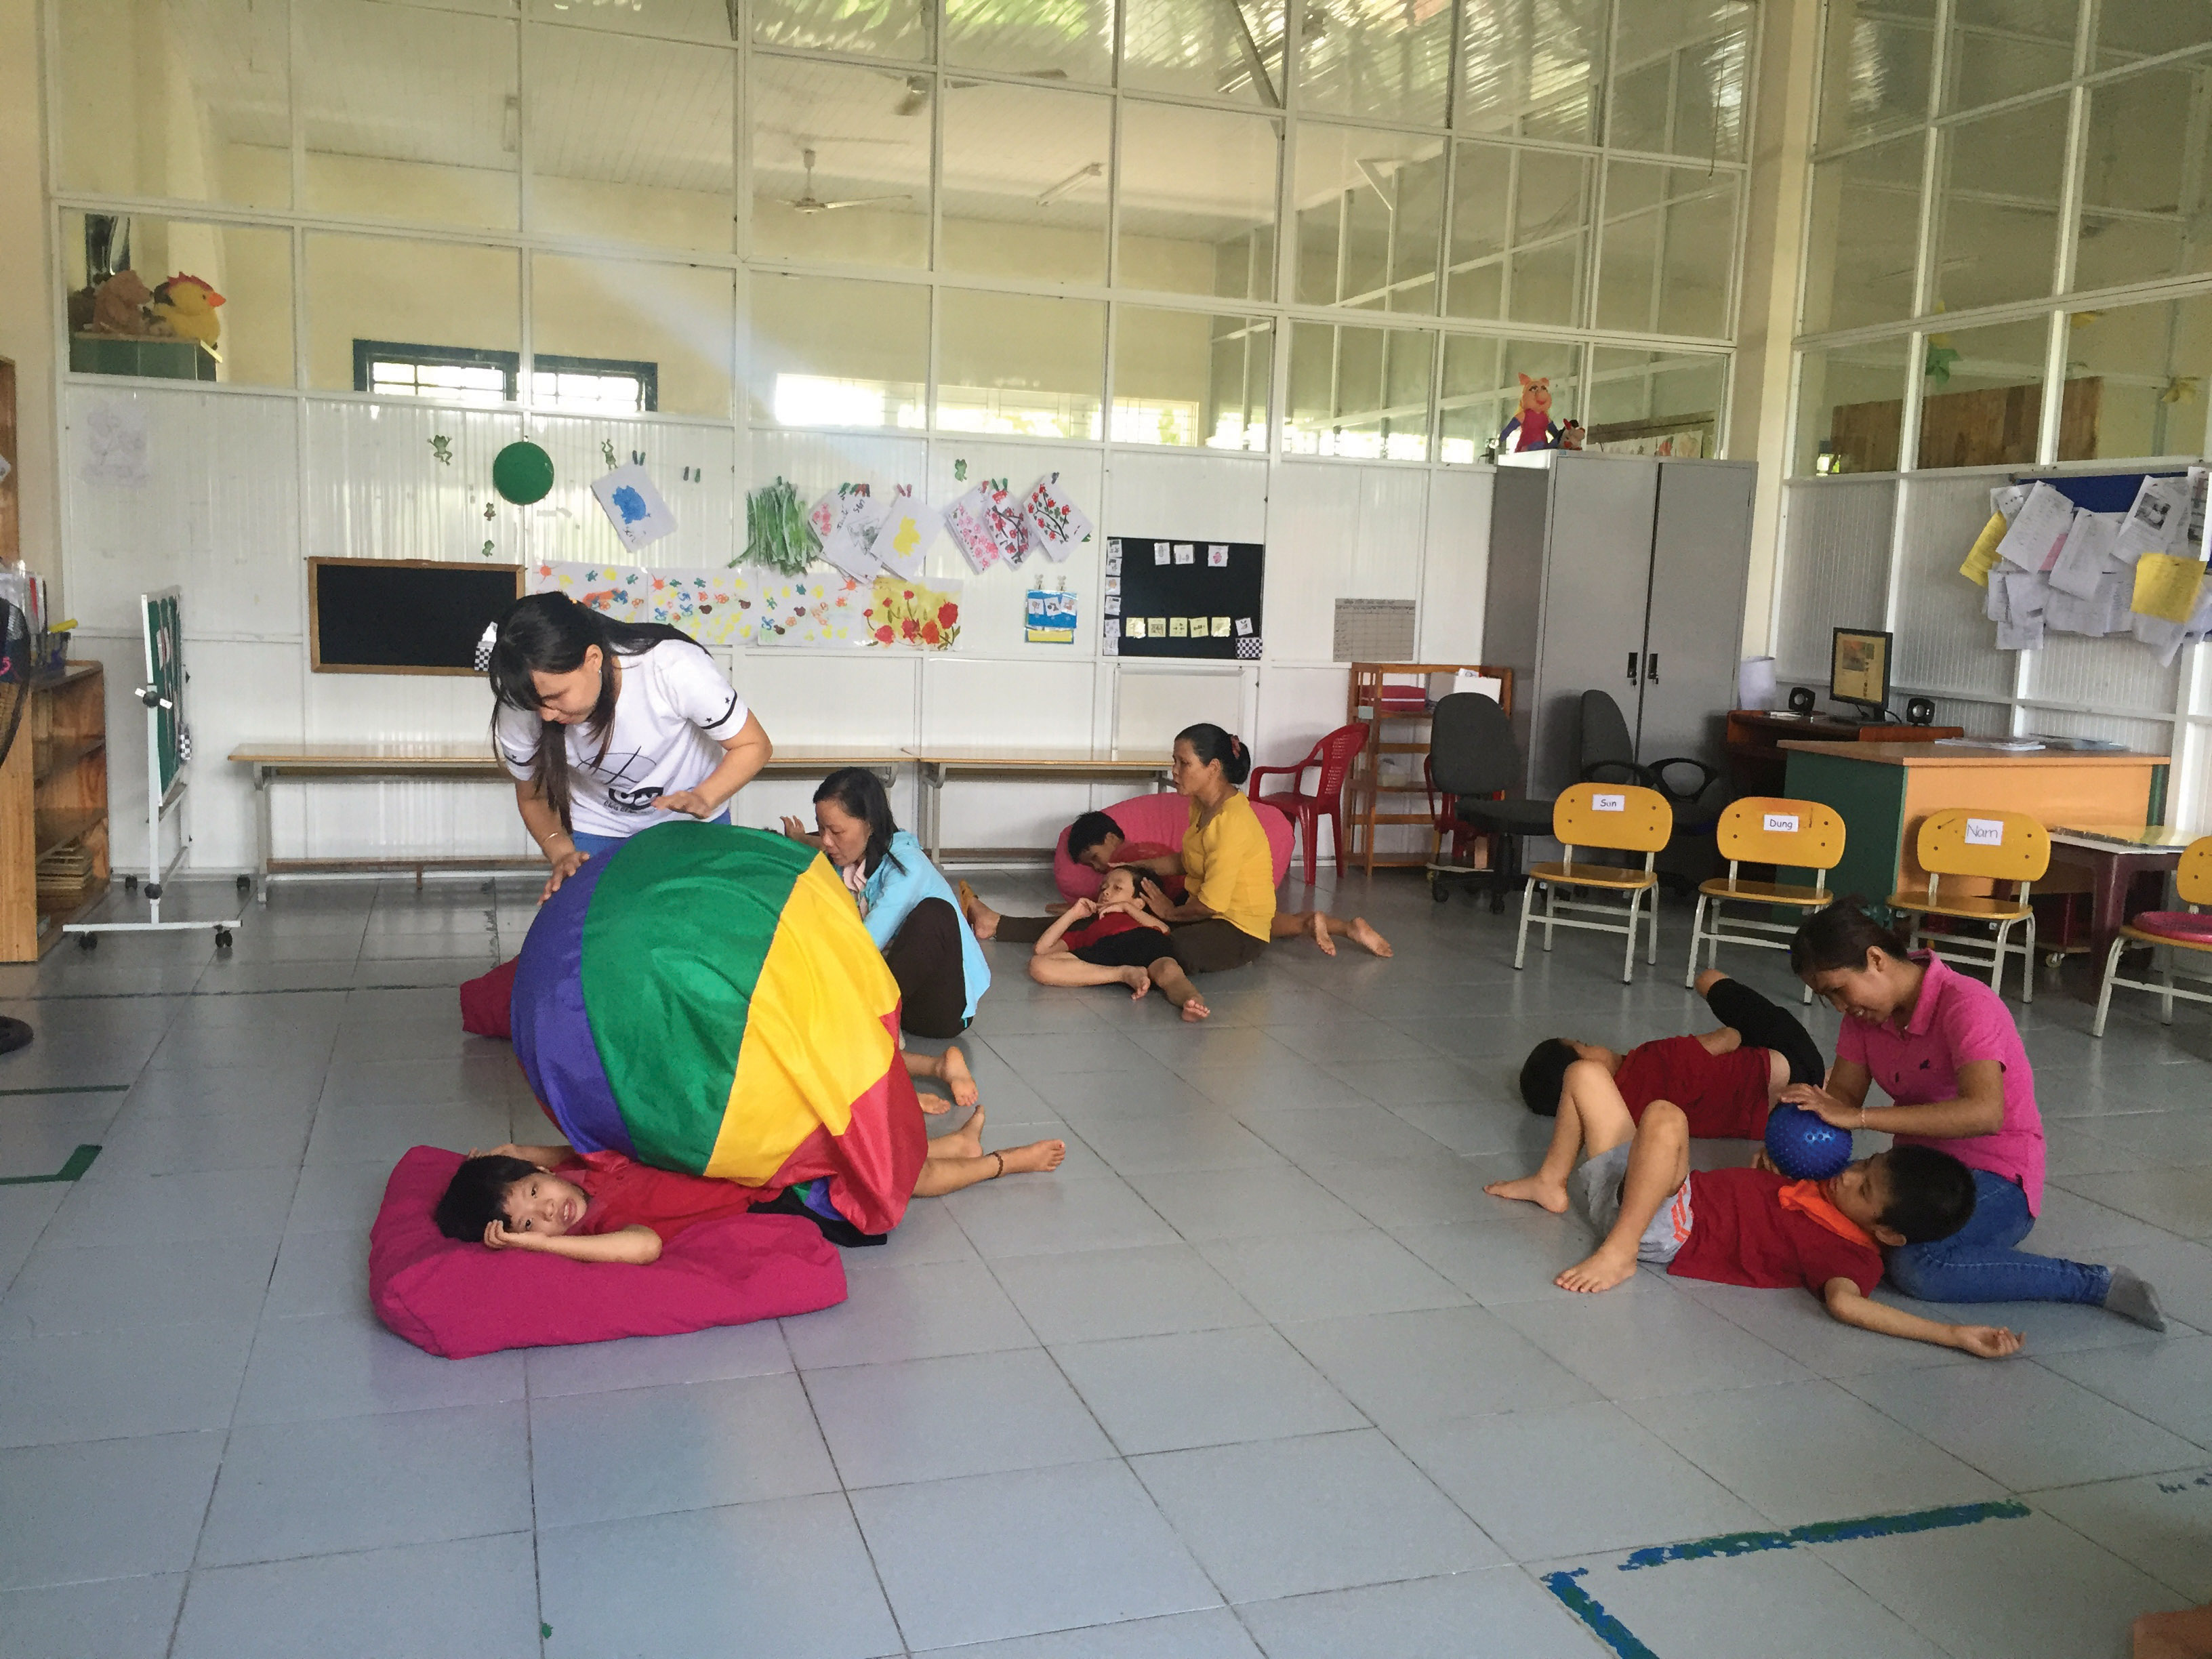 Children receiving one-on-one sensory therapy.